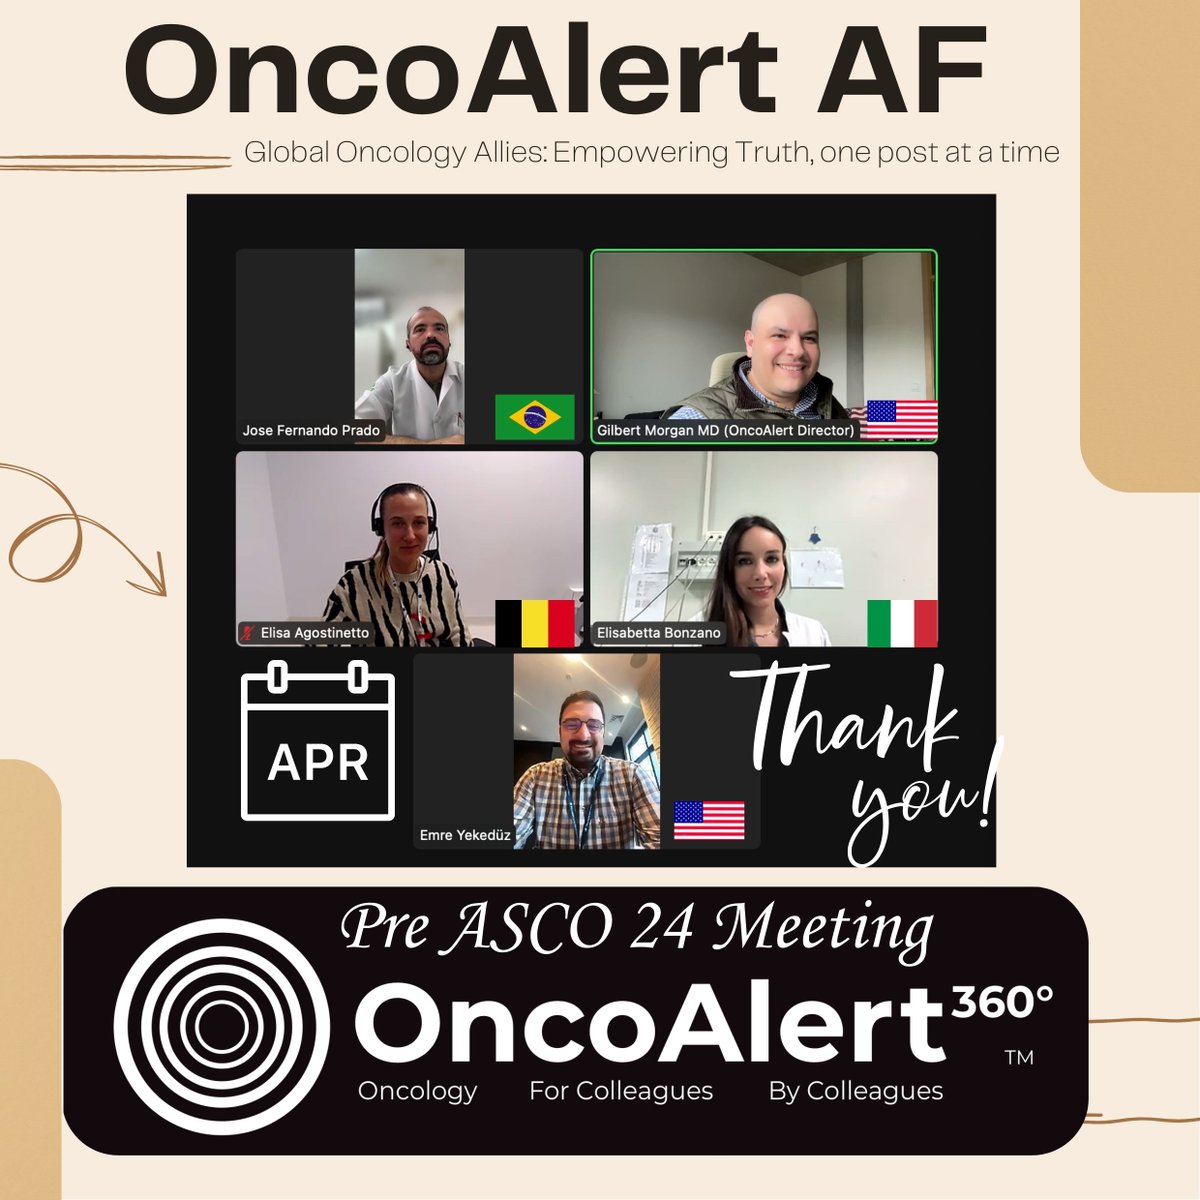 Dear Colleagues @OncoAlert & the #OncoAlertAF 🚨 are ready for #ASCO24 with many initiatives coming for Chicago‼️ Warm recommendation to follow our #AF @yekeduz_emre 🇺🇸 @ElisaAgostinett 🇧🇪 @to_be_elizabeth 🇮🇹 @FernandoOnco 🇧🇷 Sending our Best and looking forward to seeing you…